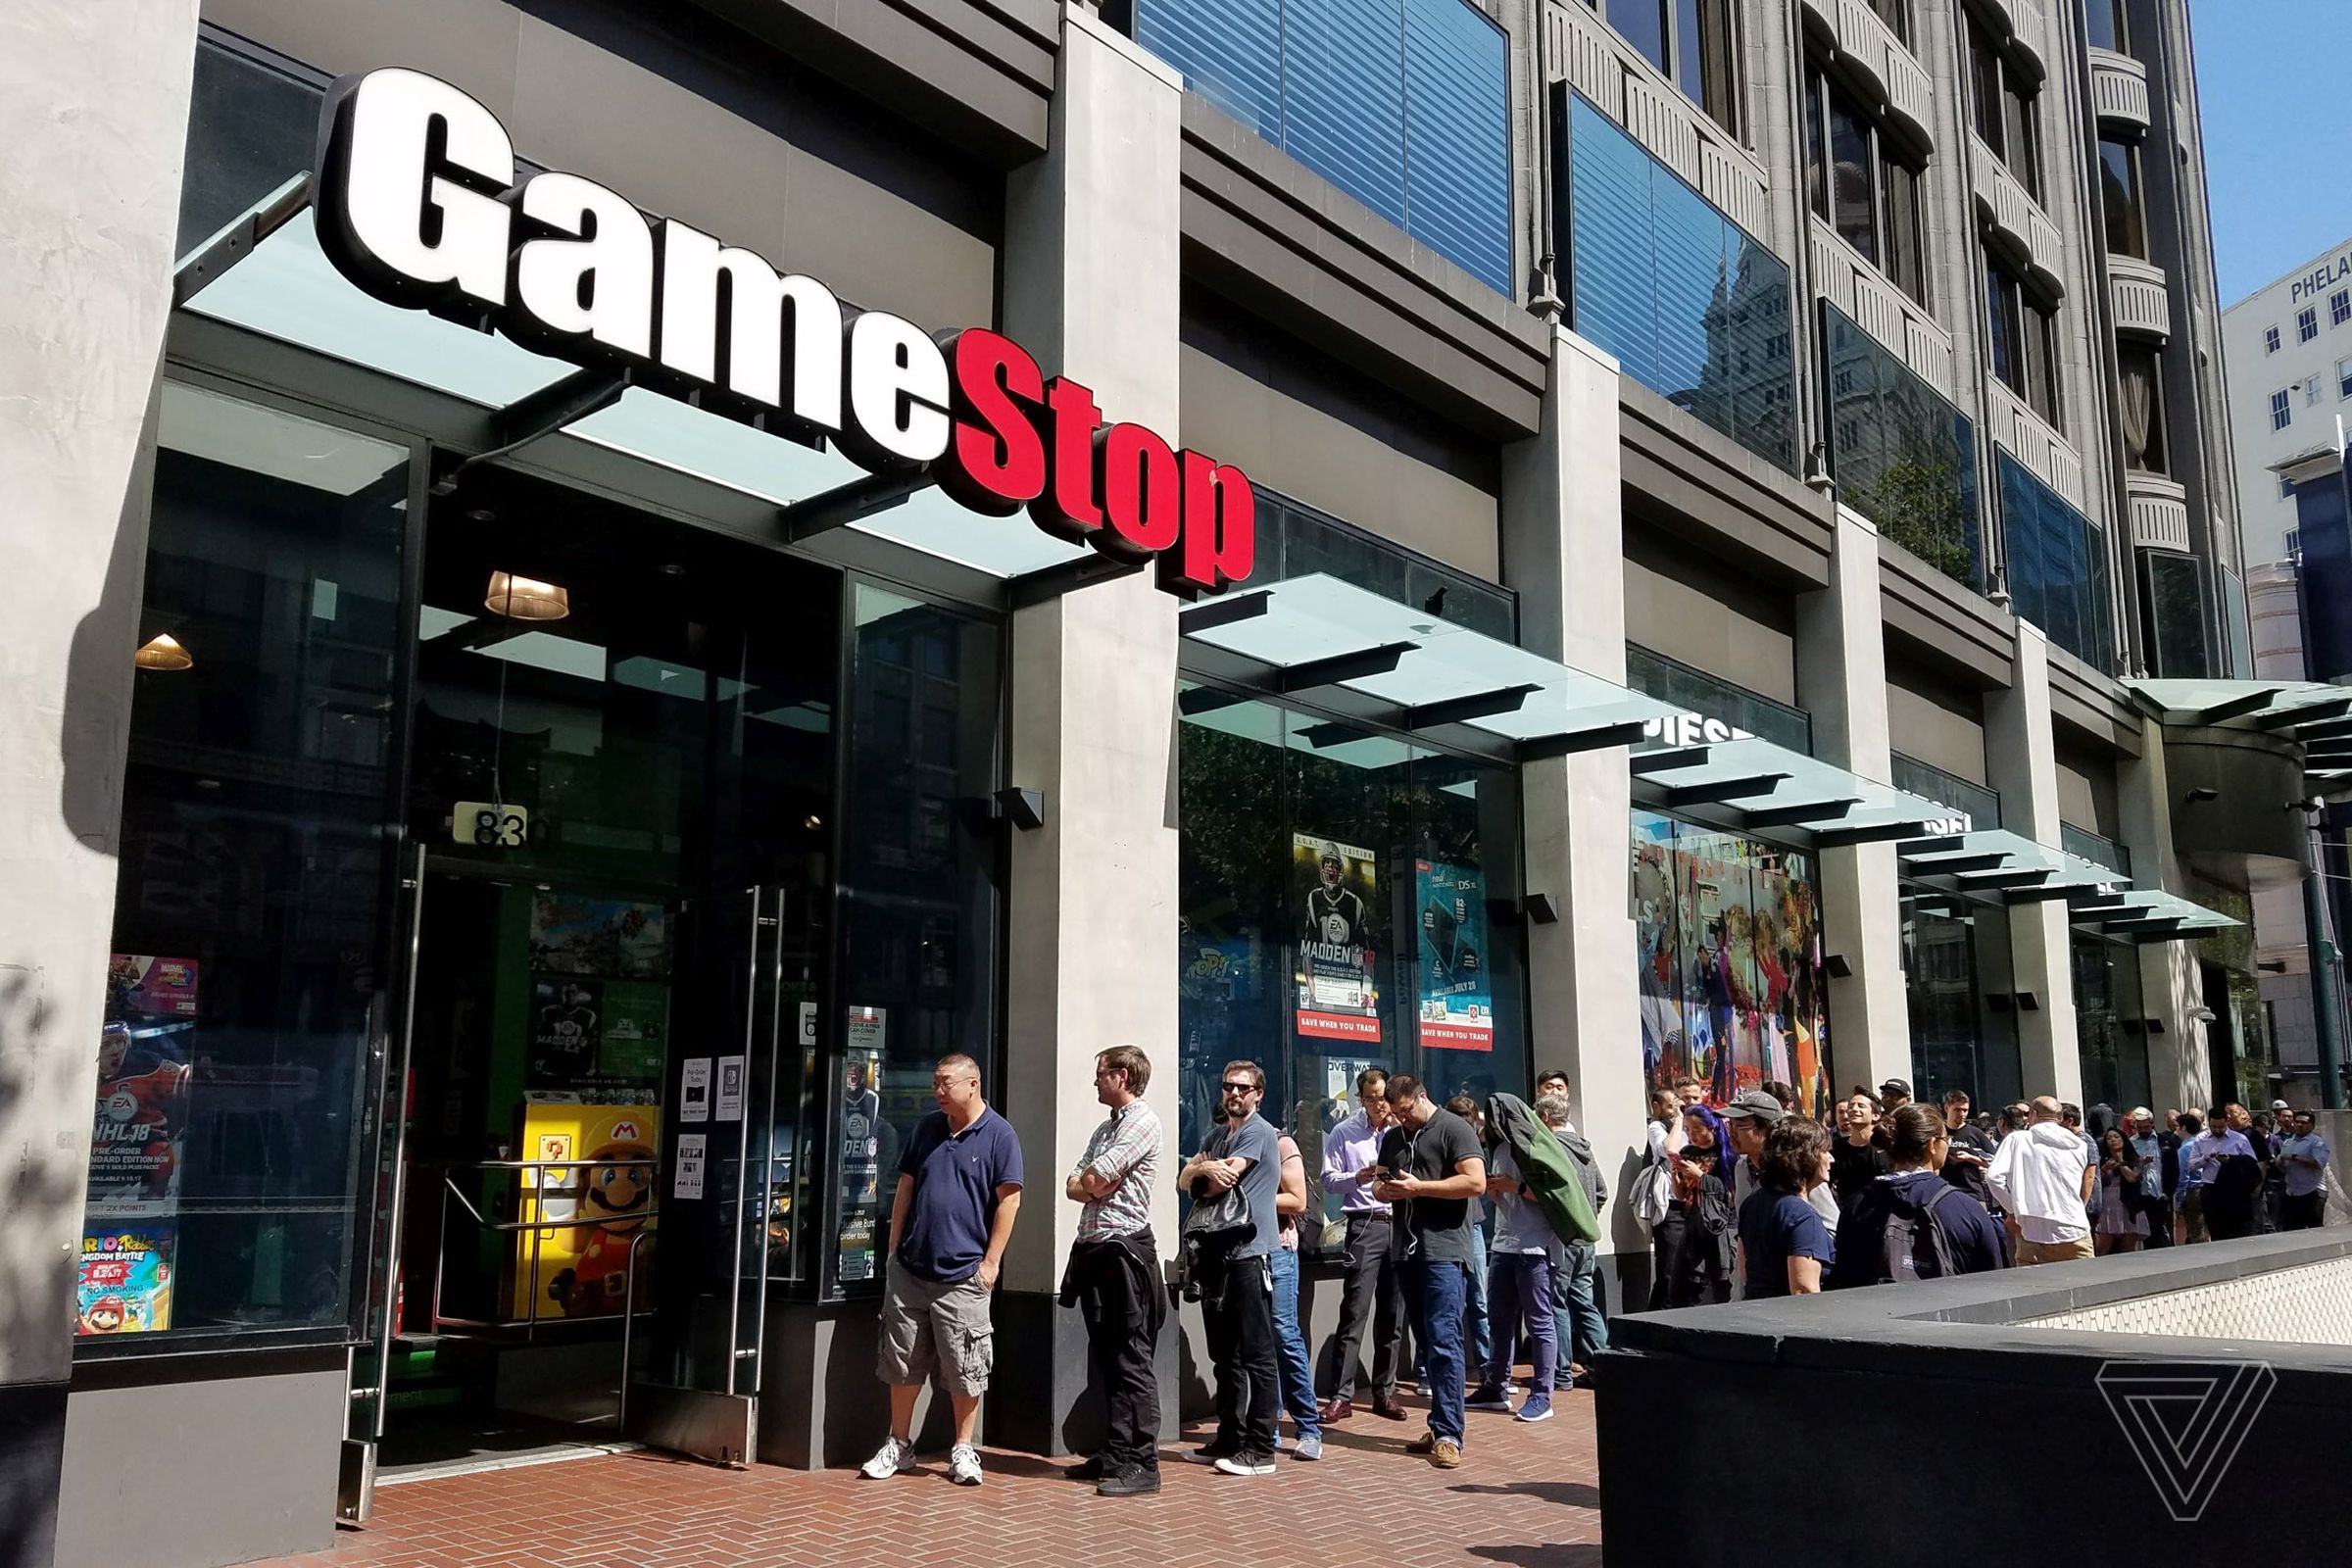 An image showing the entrance to GameStop